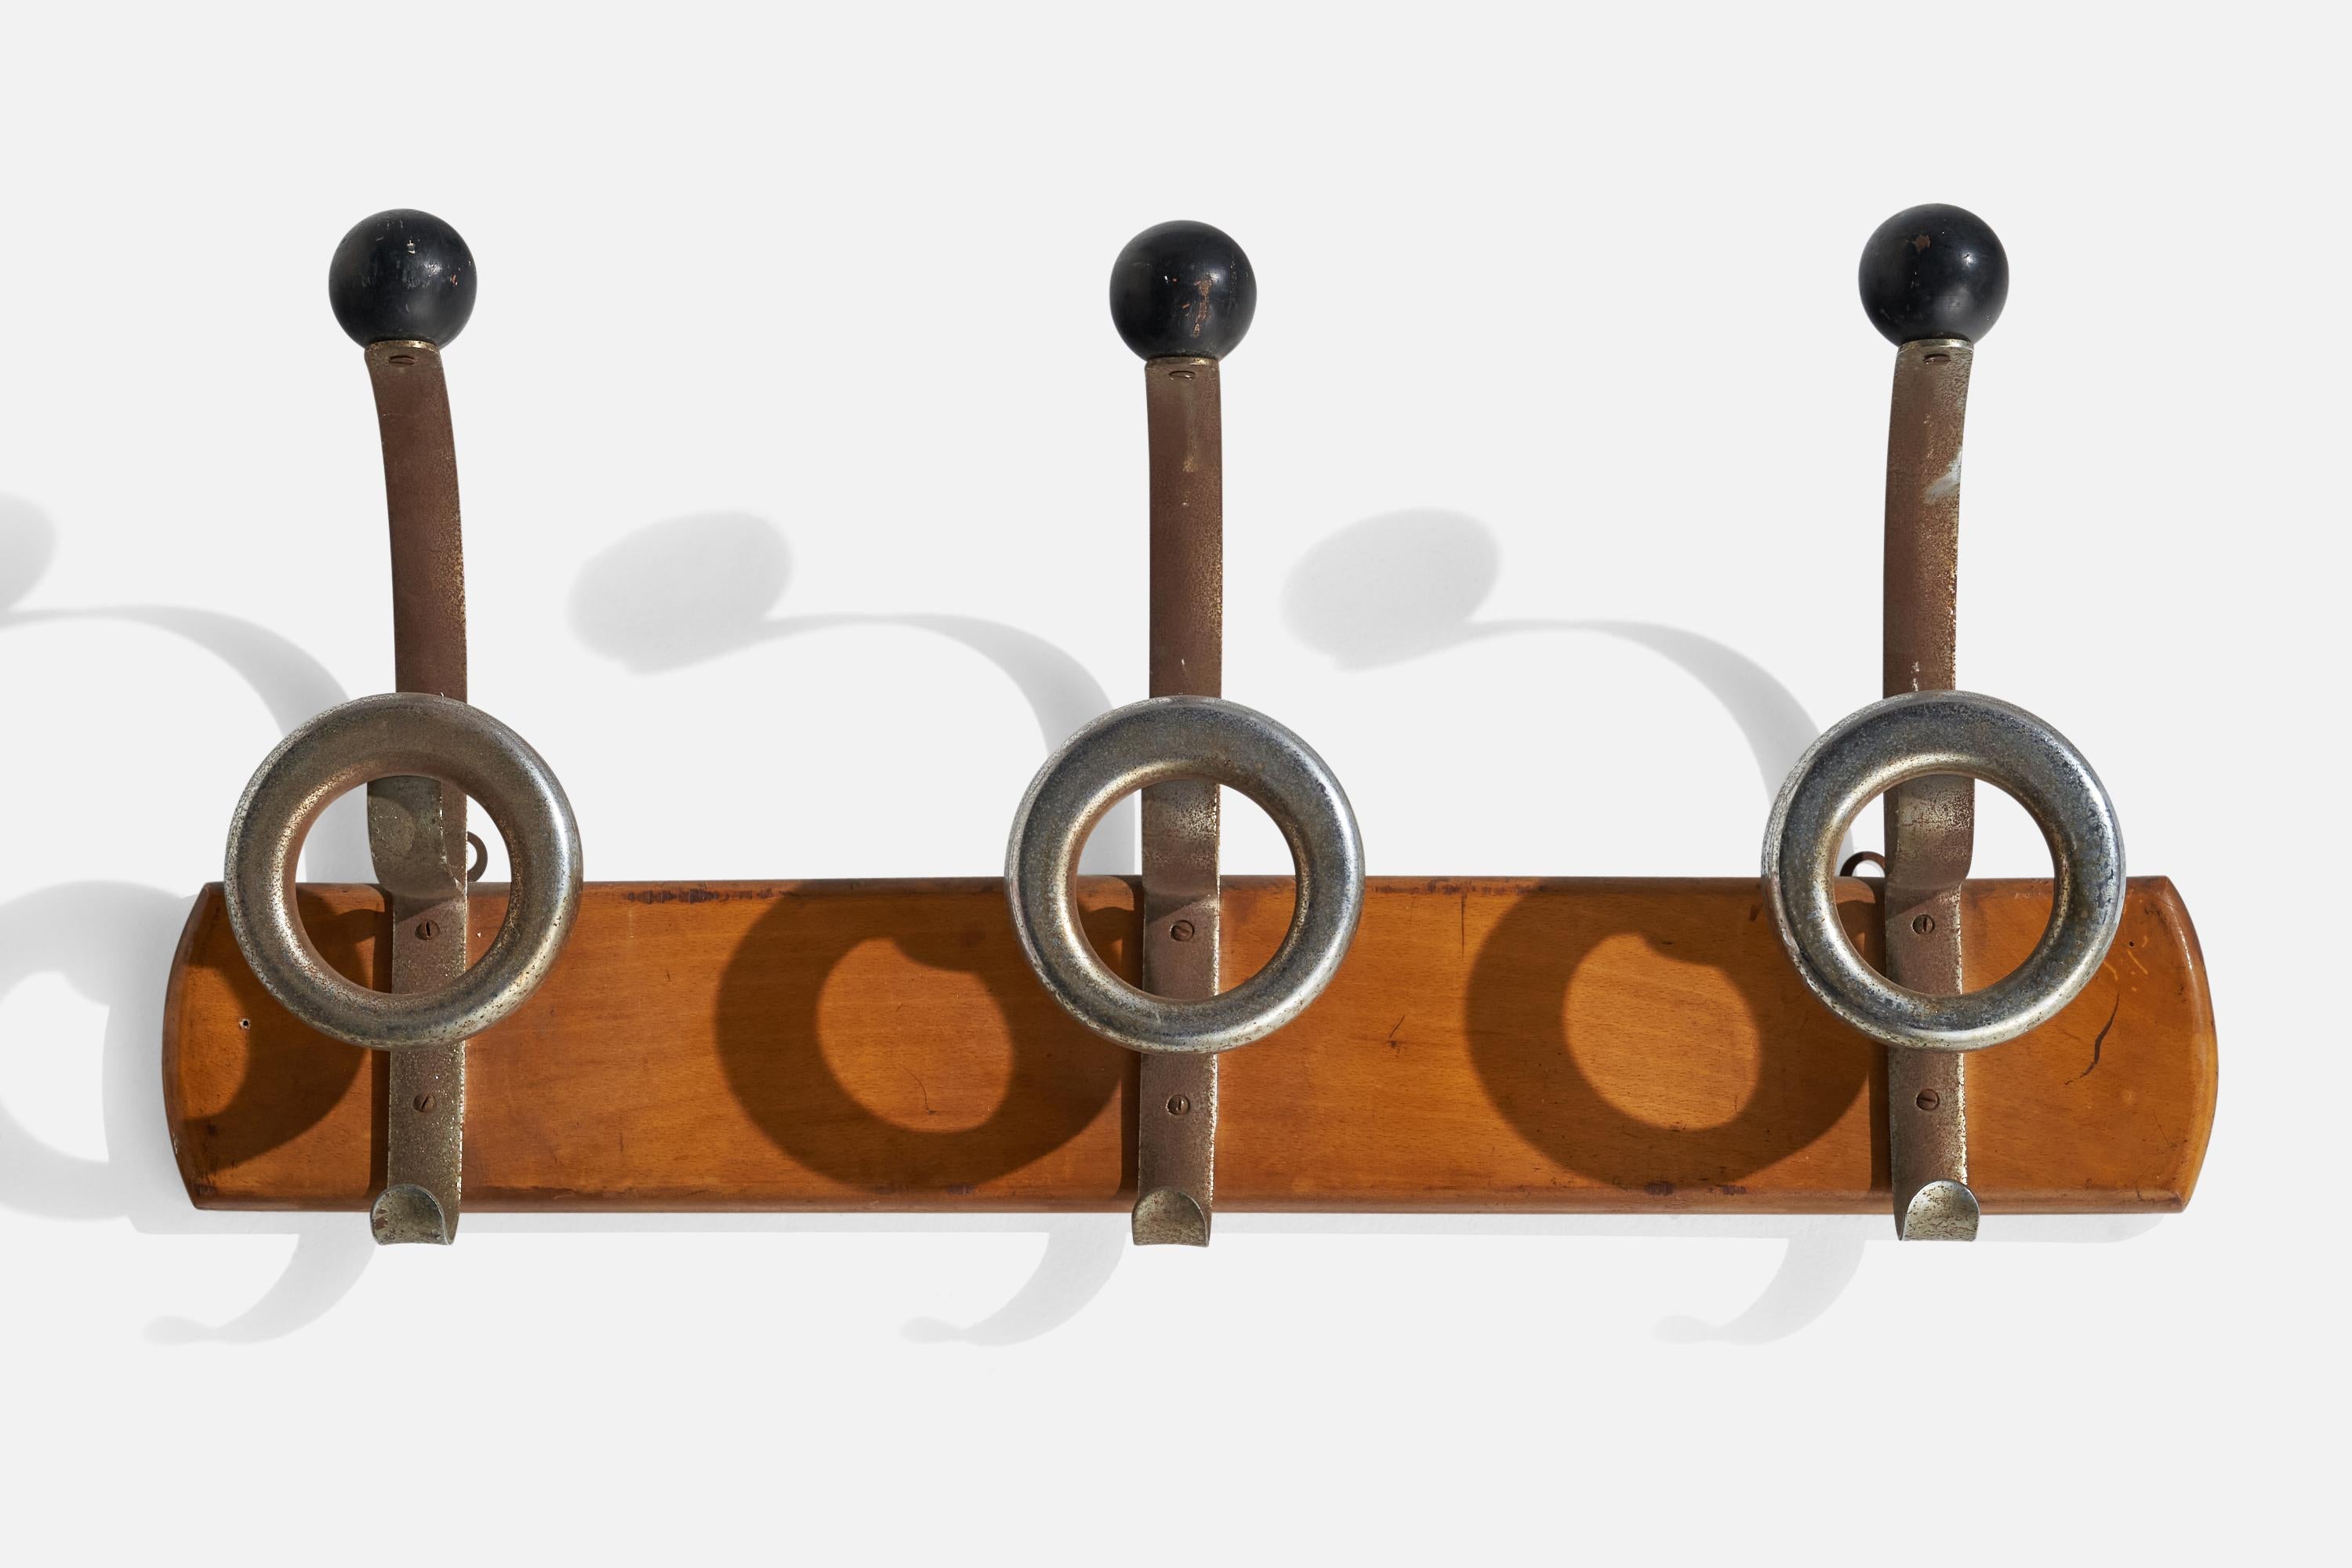 A wood, aluminium and bakelite coat rack designed and produced in Italy, 1930s.